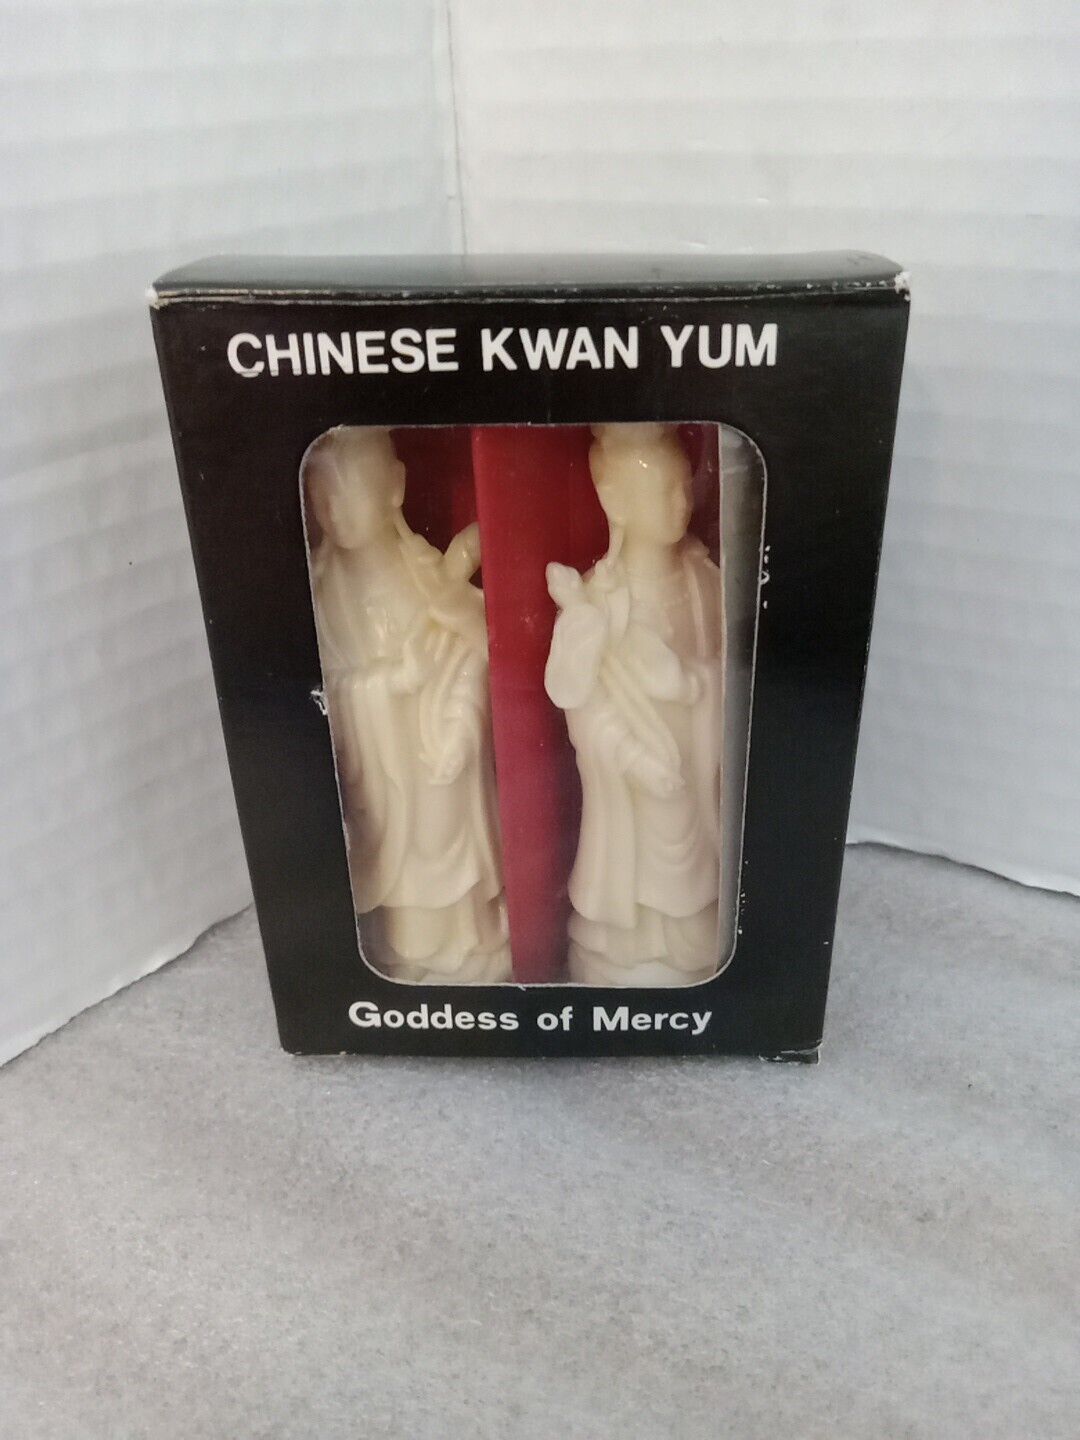 Lot Of 2 Chinese Kwan Yum Goddess Of Mercy Statues. New In Box 4x3